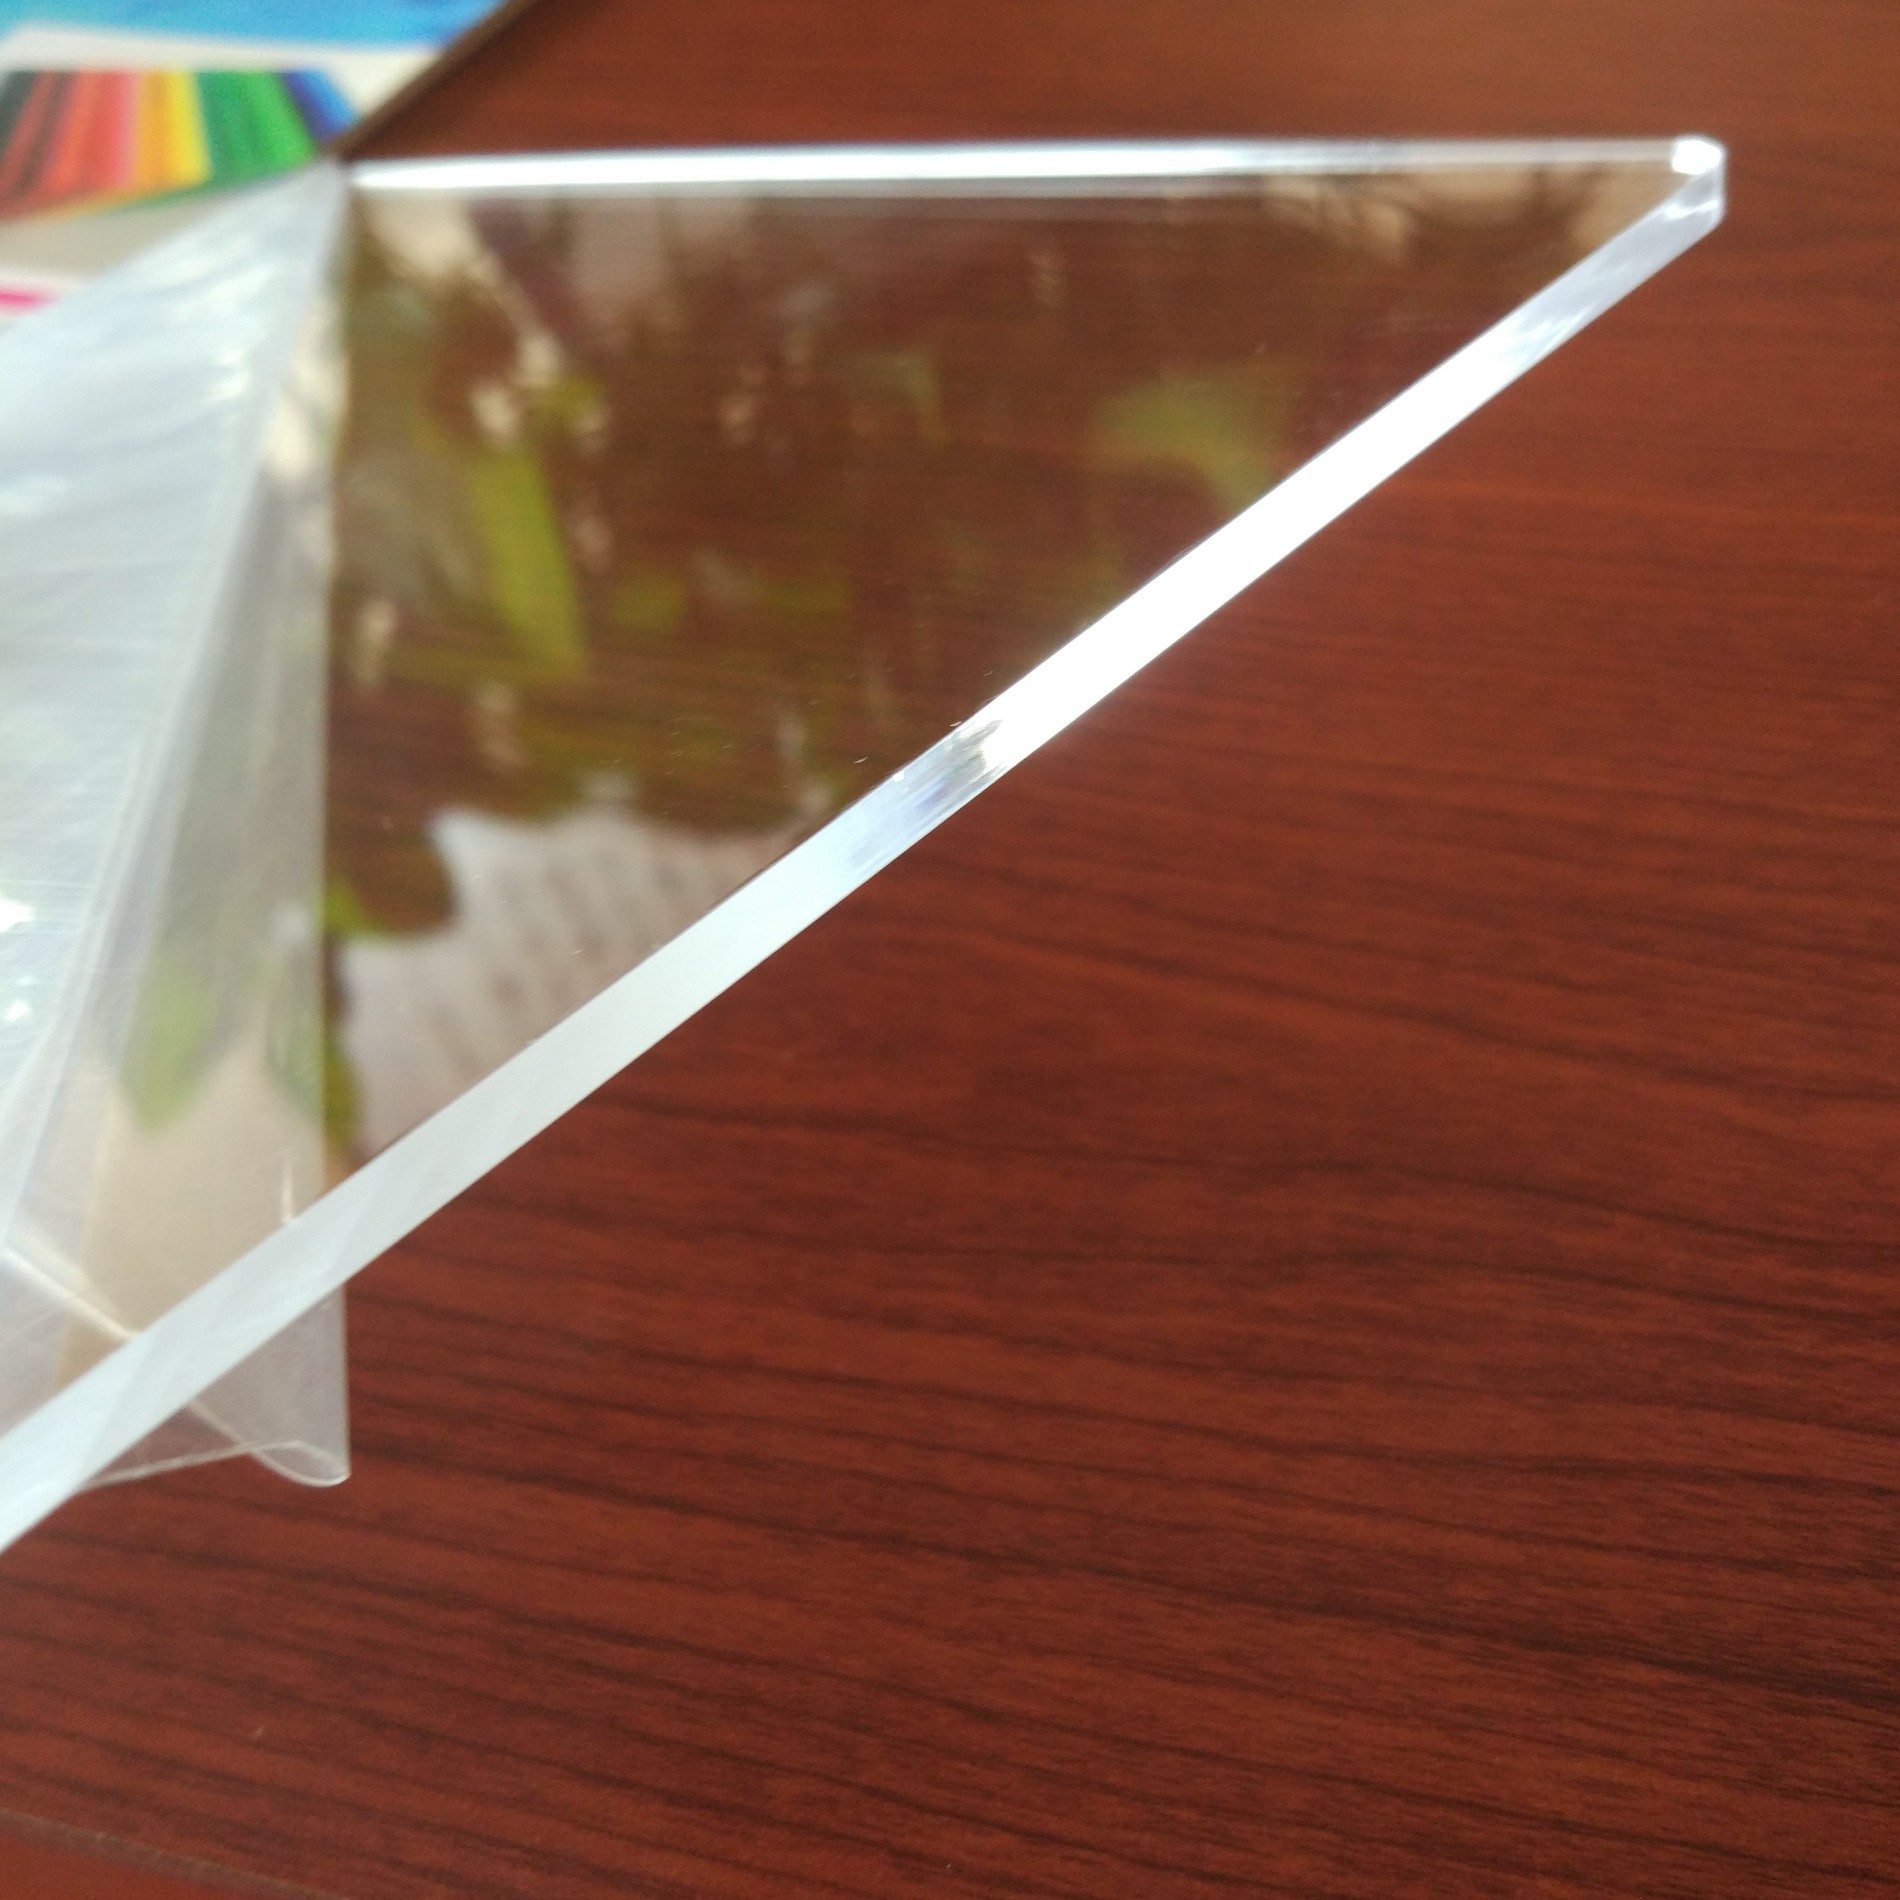 4mm 4ft x 8ft clear acrylic sheet cast perspex sheet high quality Manufacturers, 4mm 4ft x 8ft clear acrylic sheet cast perspex sheet high quality Factory, Supply 4mm 4ft x 8ft clear acrylic sheet cast perspex sheet high quality